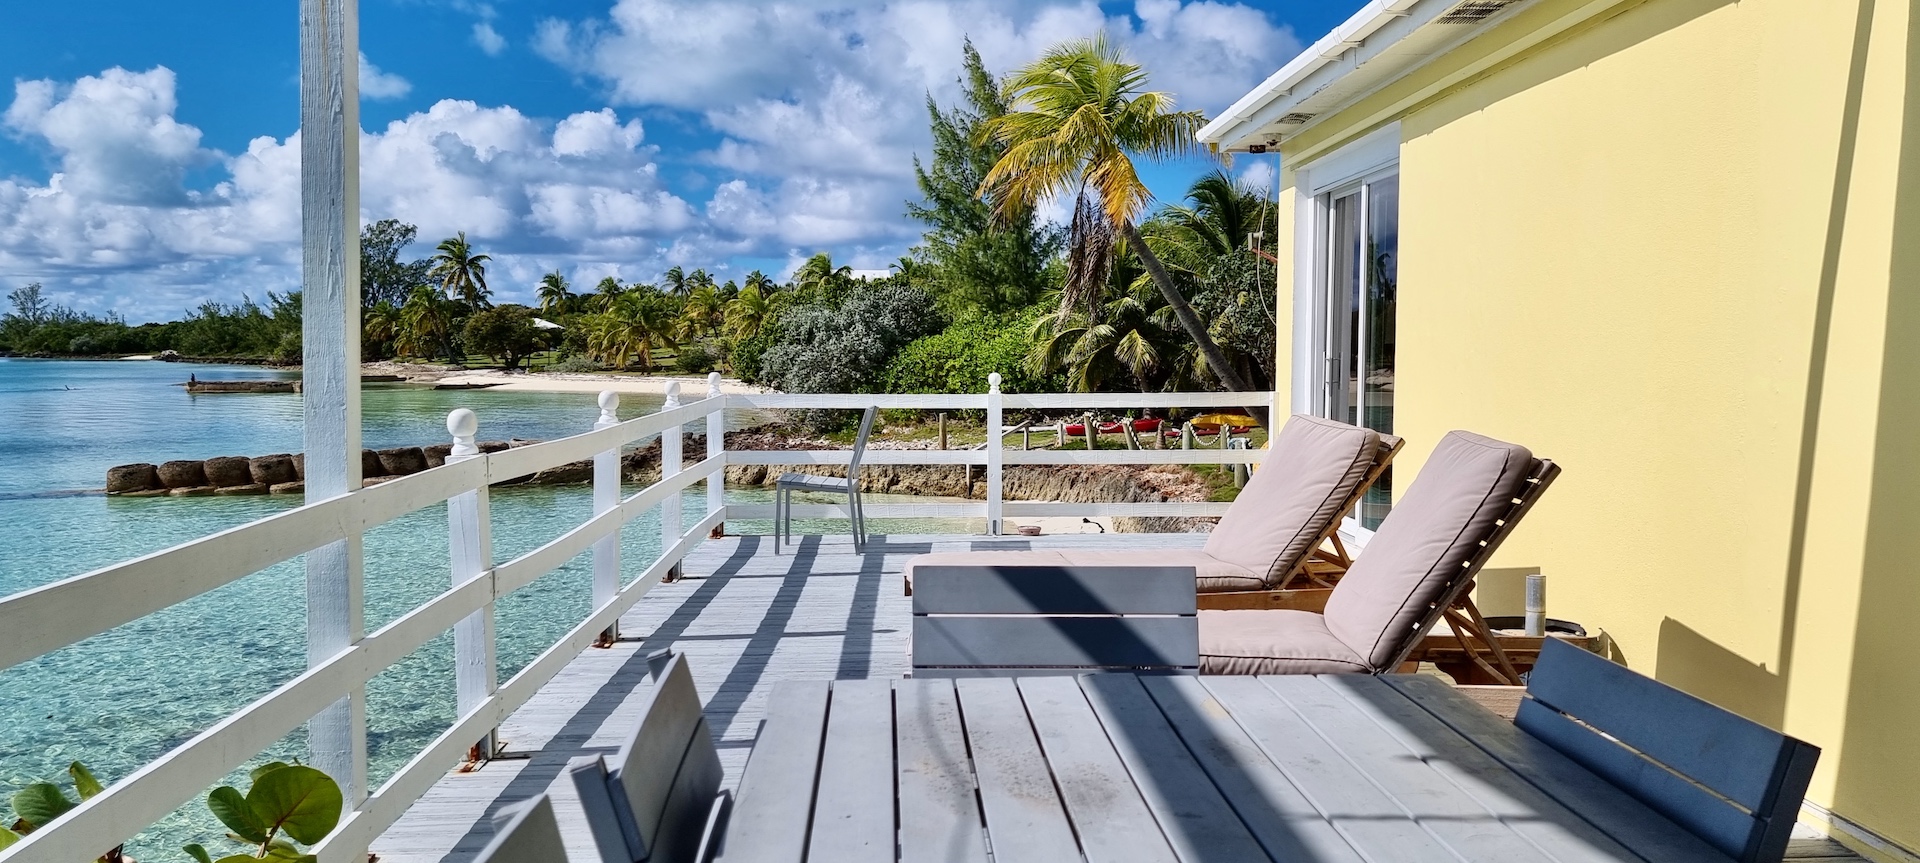 waterfront-investment-acreage-russell-island-bahamas-12